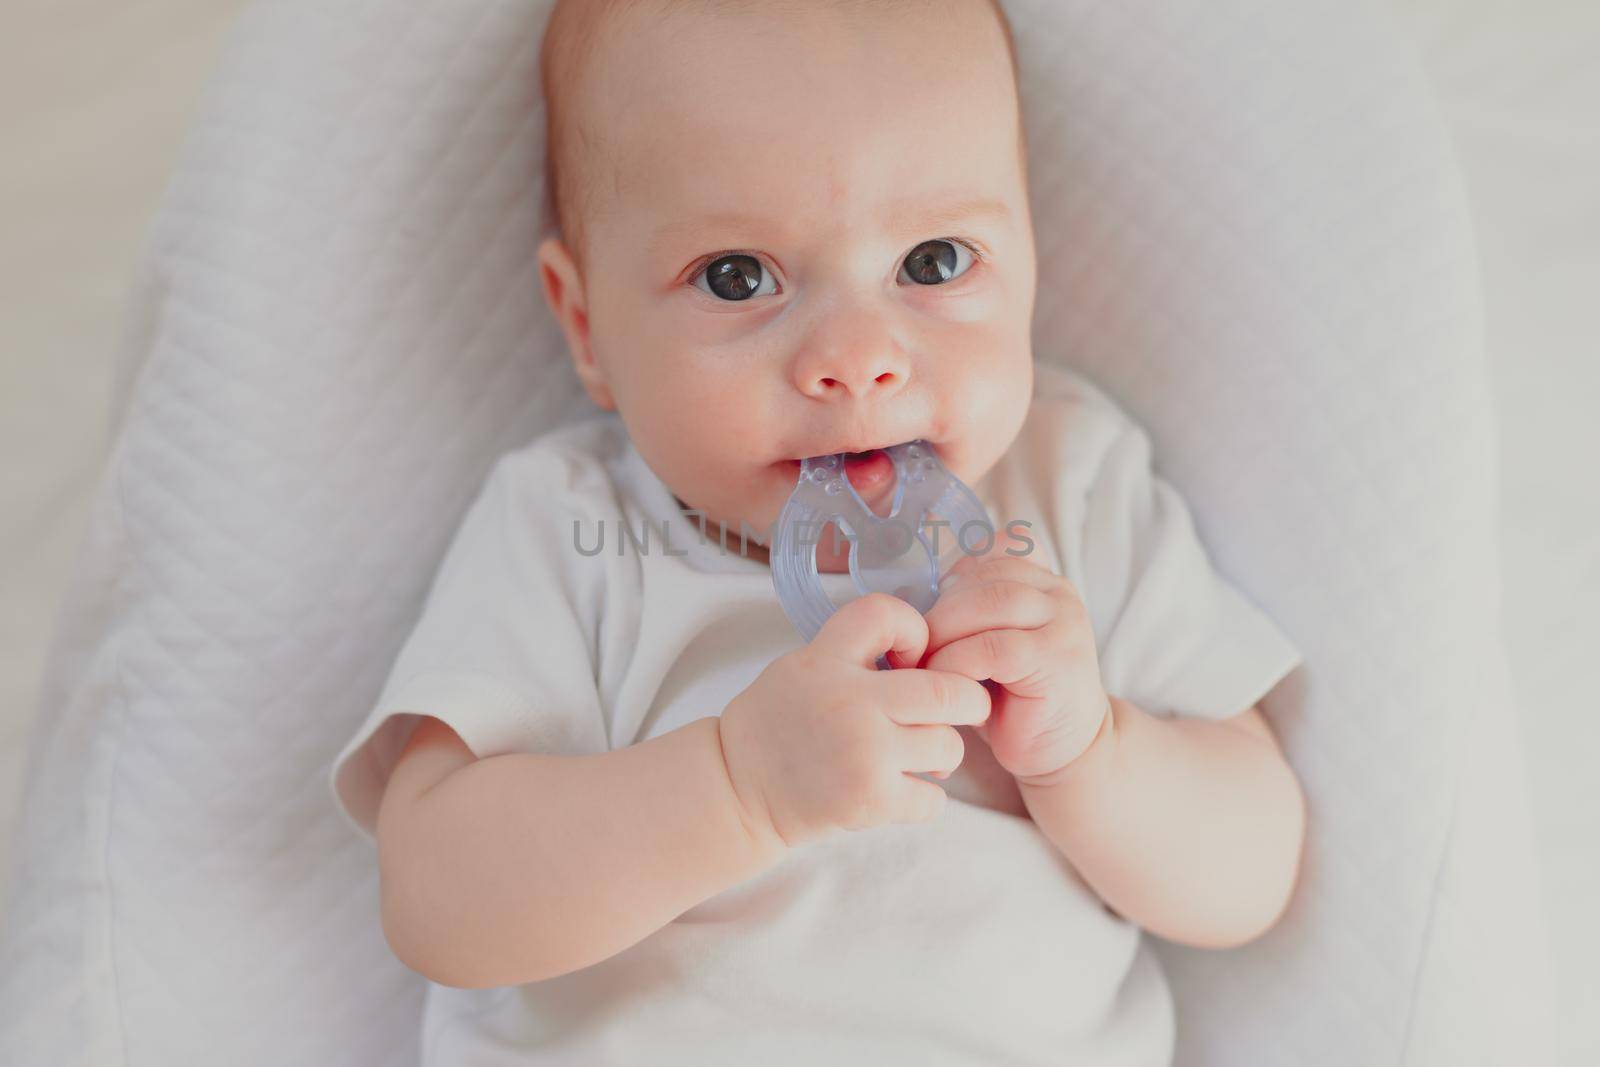 The kid is gnawing on a lifestyle rattle . Children's toys. An article about children. An article about children's toys. An article about teething. by alenka2194